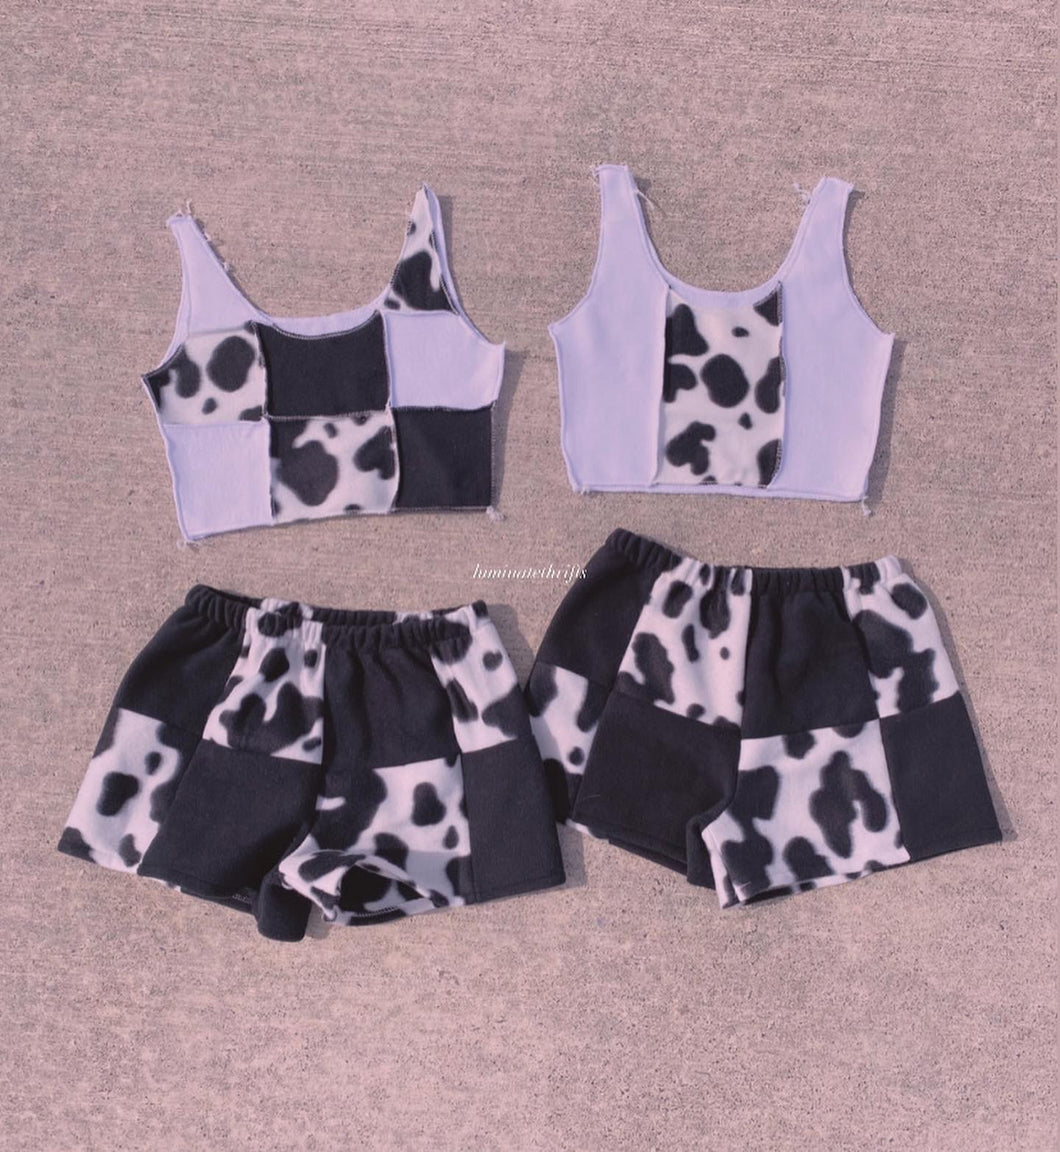 Matching Cow Sets (shorts only)